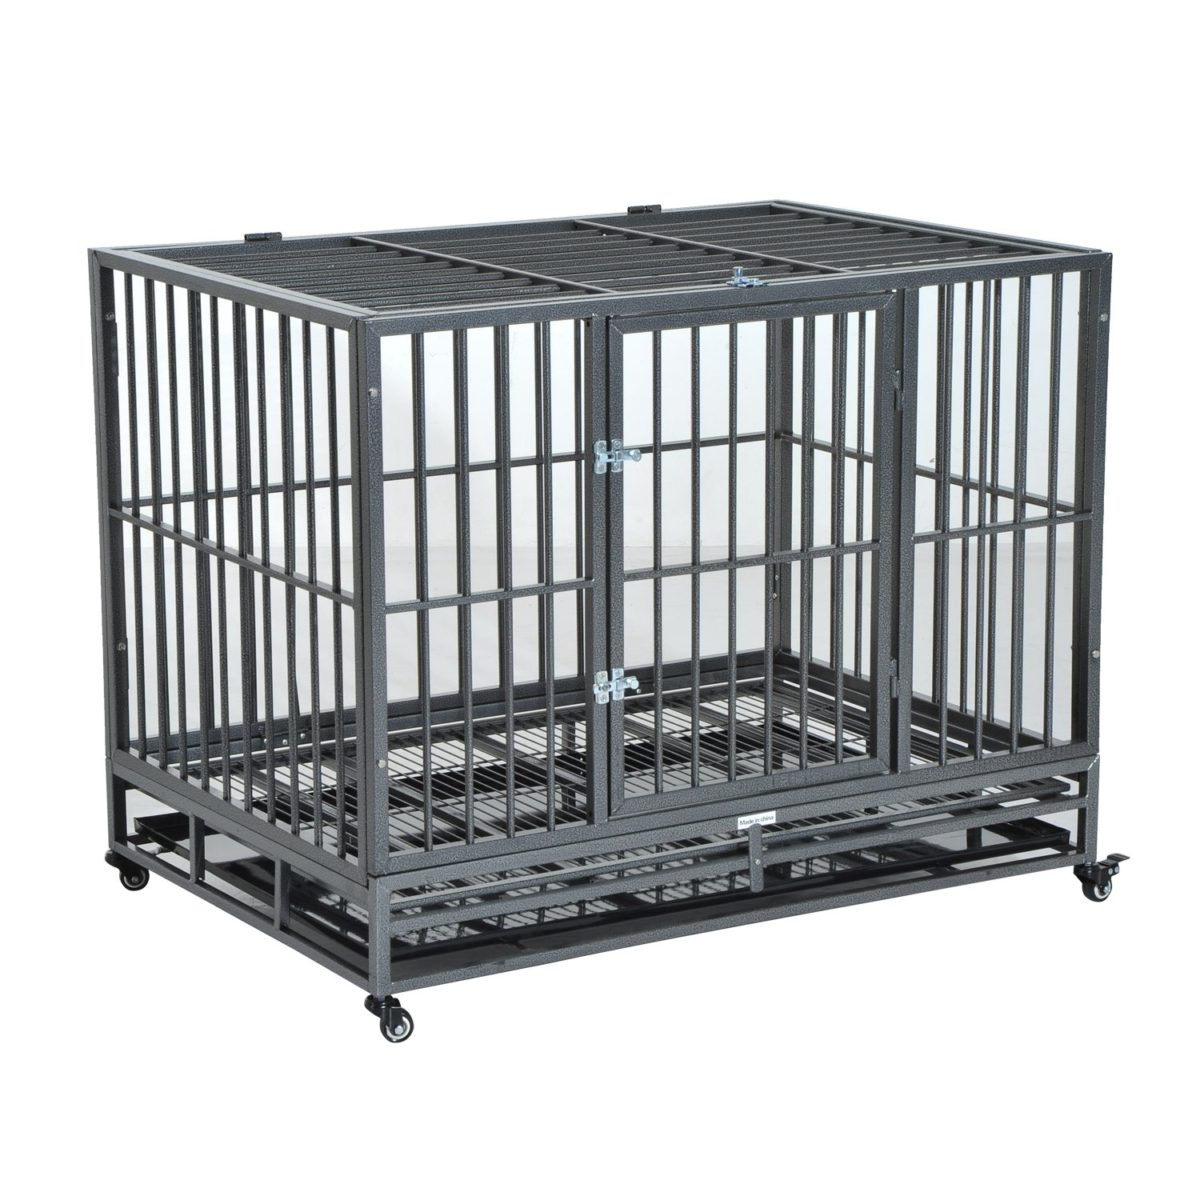 PawHut Heavy Duty Steel Dog Crate & Kennel Removable Tray Pet Cage Playpen w/Wheels for Training Indoor Outdoor Grey Vein 42.5" L x 30" W x 34.5" H This heavy obligation dog kennel is secured by 2 slide-bolt latches on the entrance entry door and a central slide-bolt latch on the highest hatch. The metal body retains your pets safe inside. This sturdy dog crate features a strong slide out tray and a slide out flooring grate for simple cleansing and upkeep.